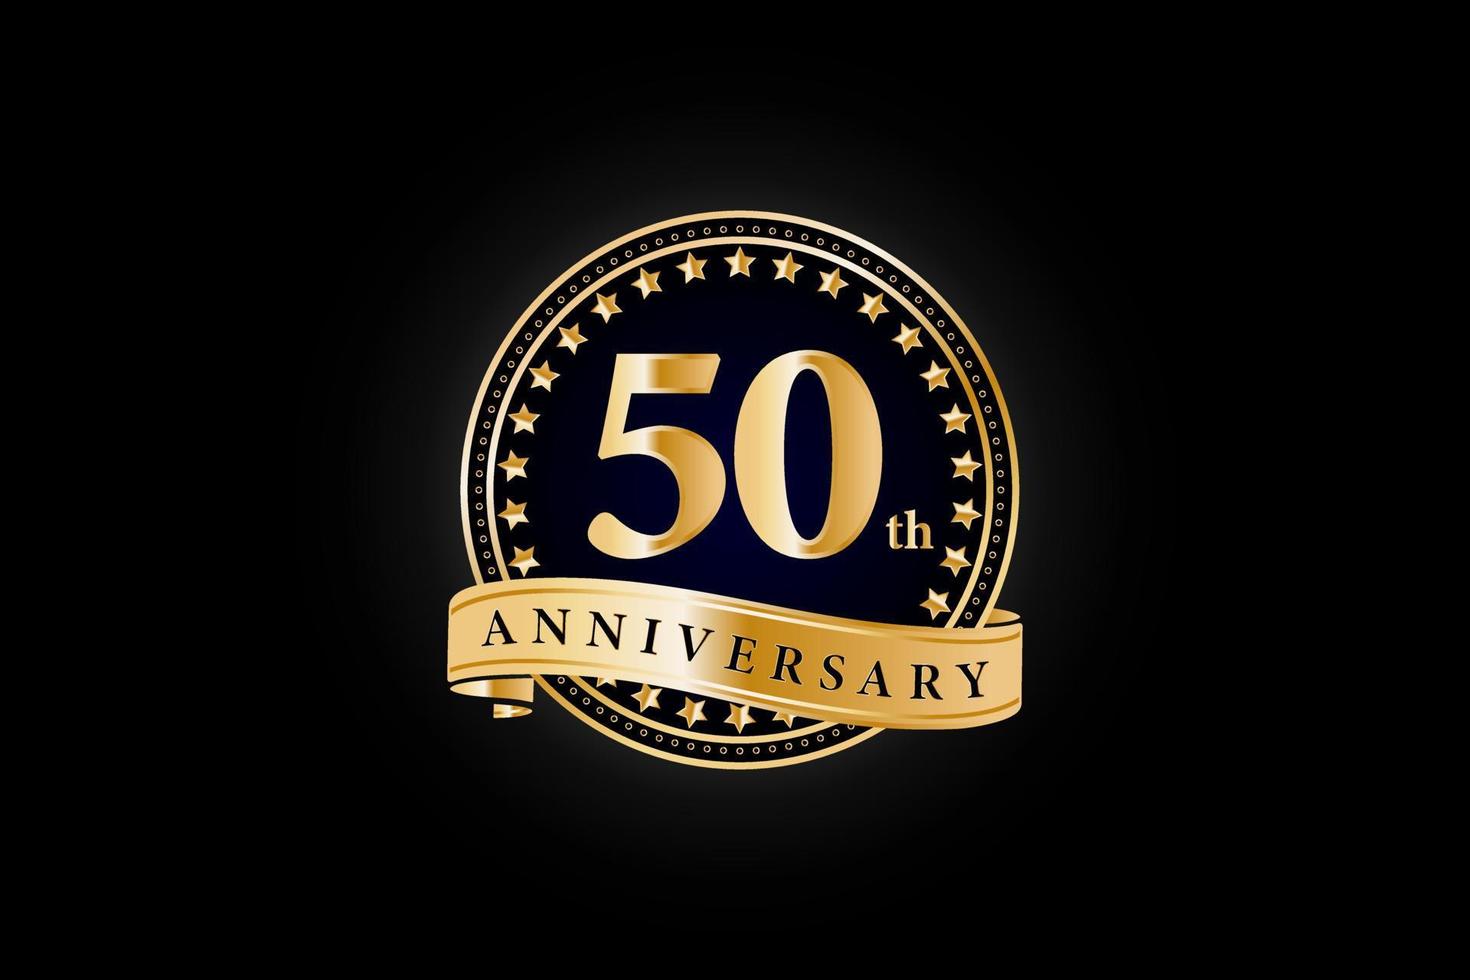 50th Anniversary golden gold logo with ring and gold ribbon isolated on black background, vector design for celebration.